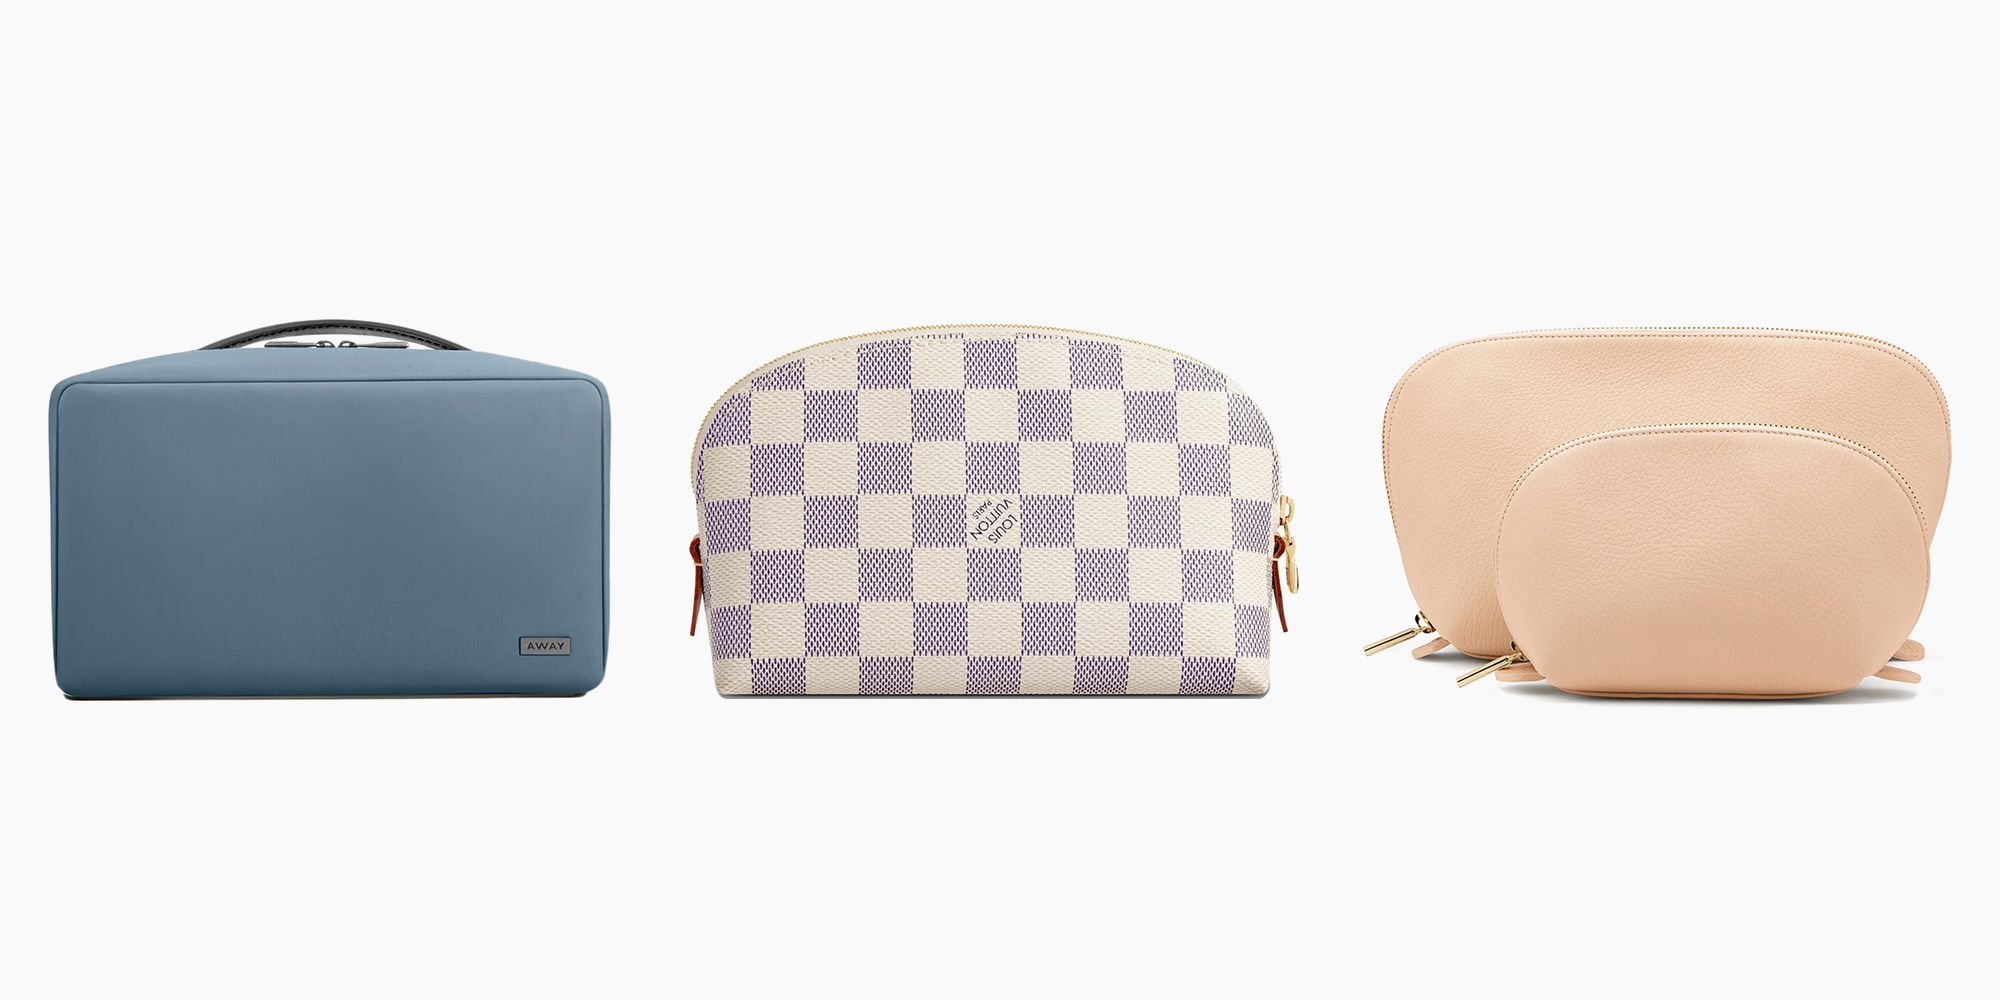 17 Toiletry Bags That Will Look Cute on Any Hotel Vanity